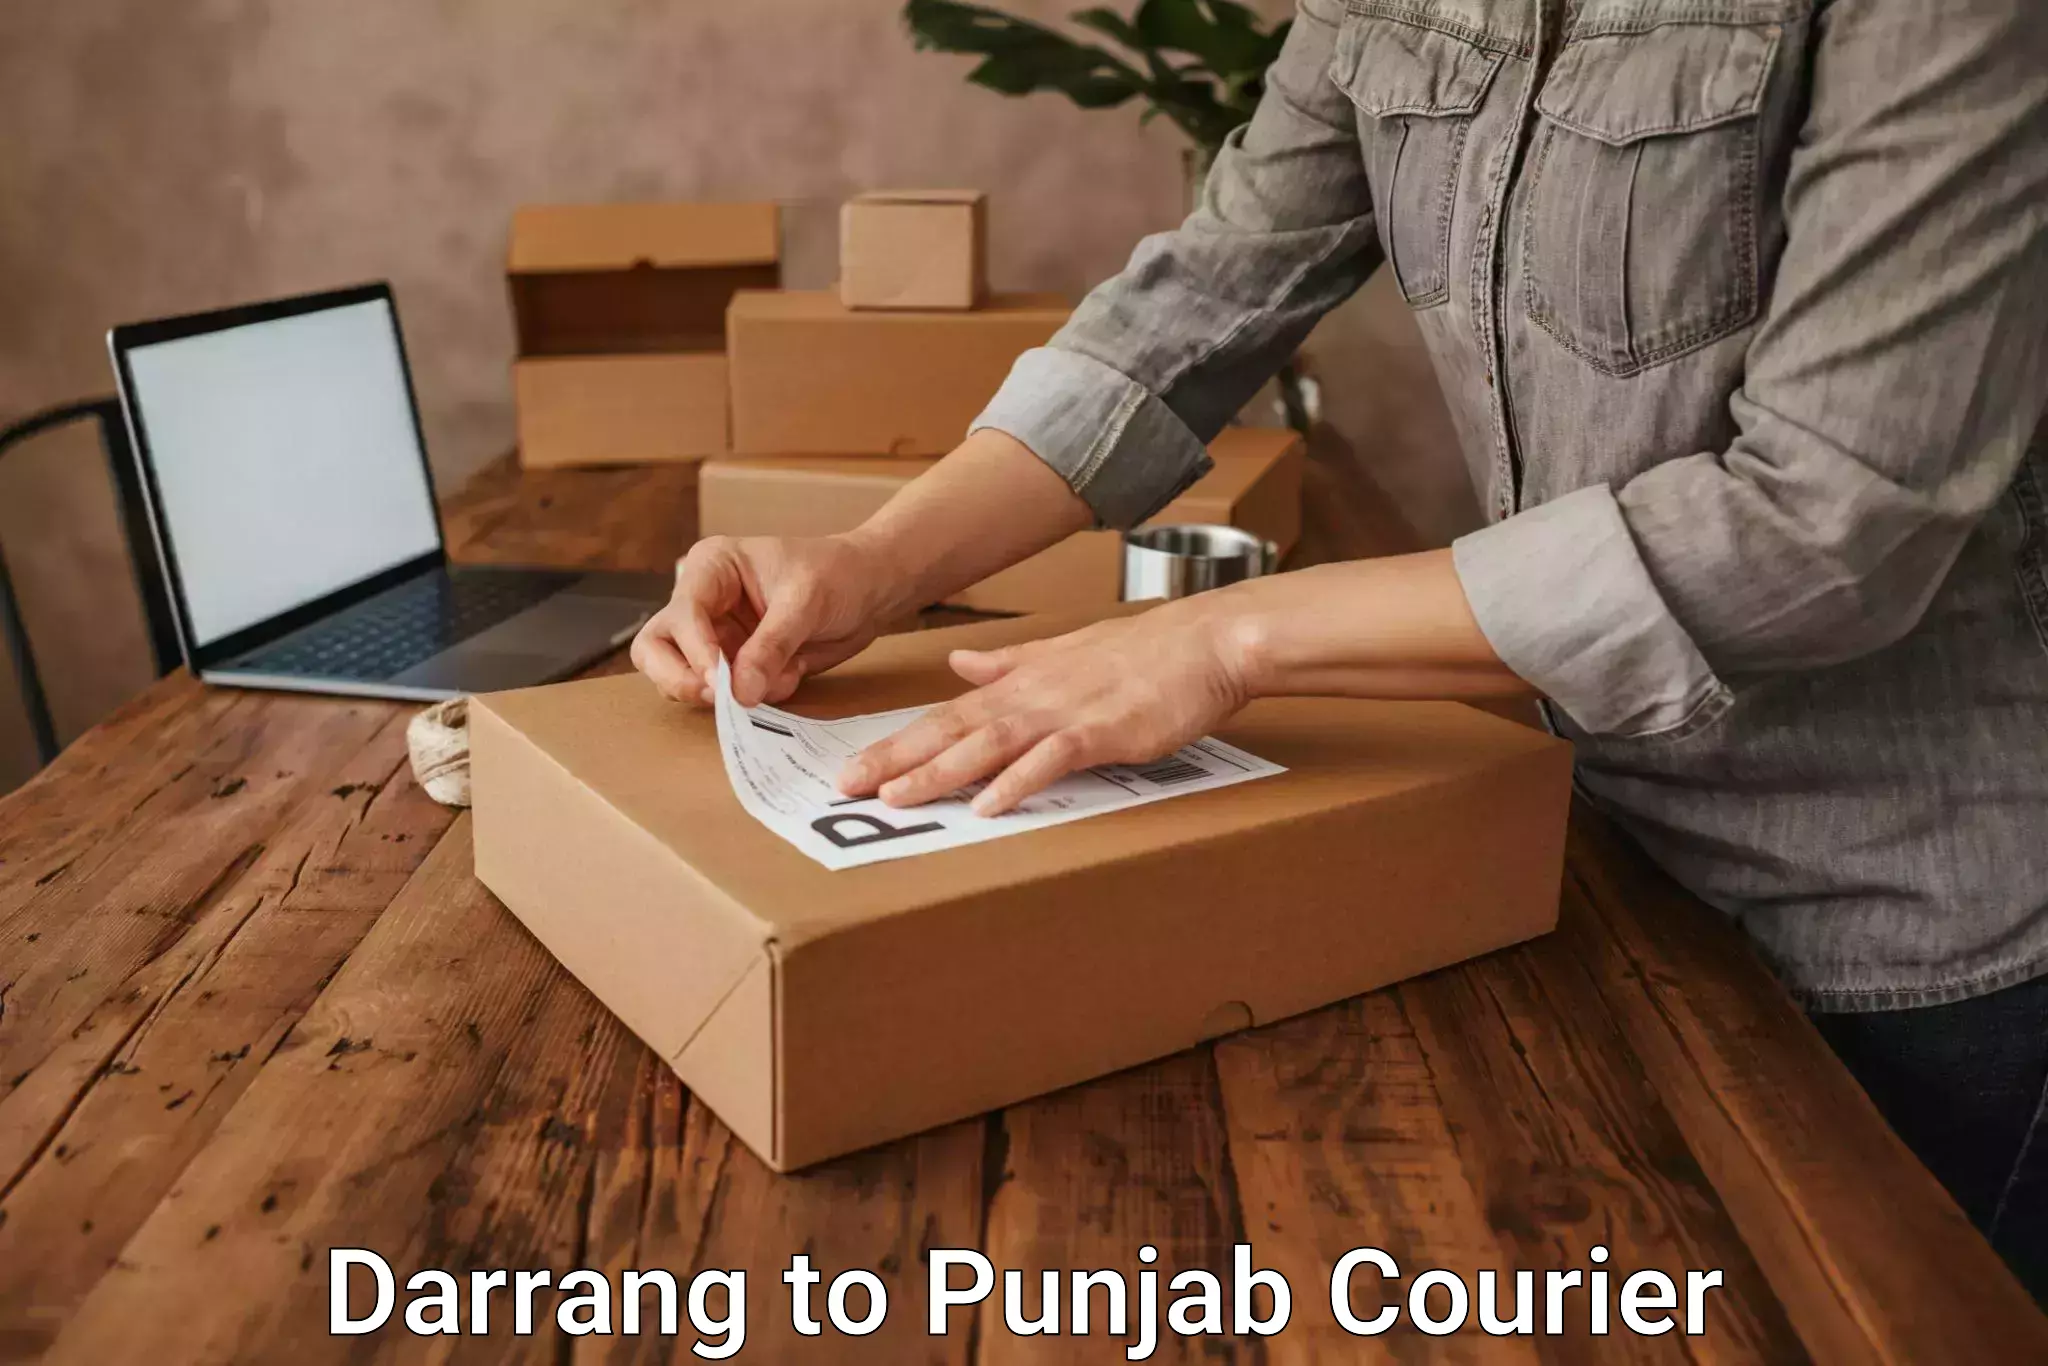 End-to-end delivery Darrang to Zirakpur